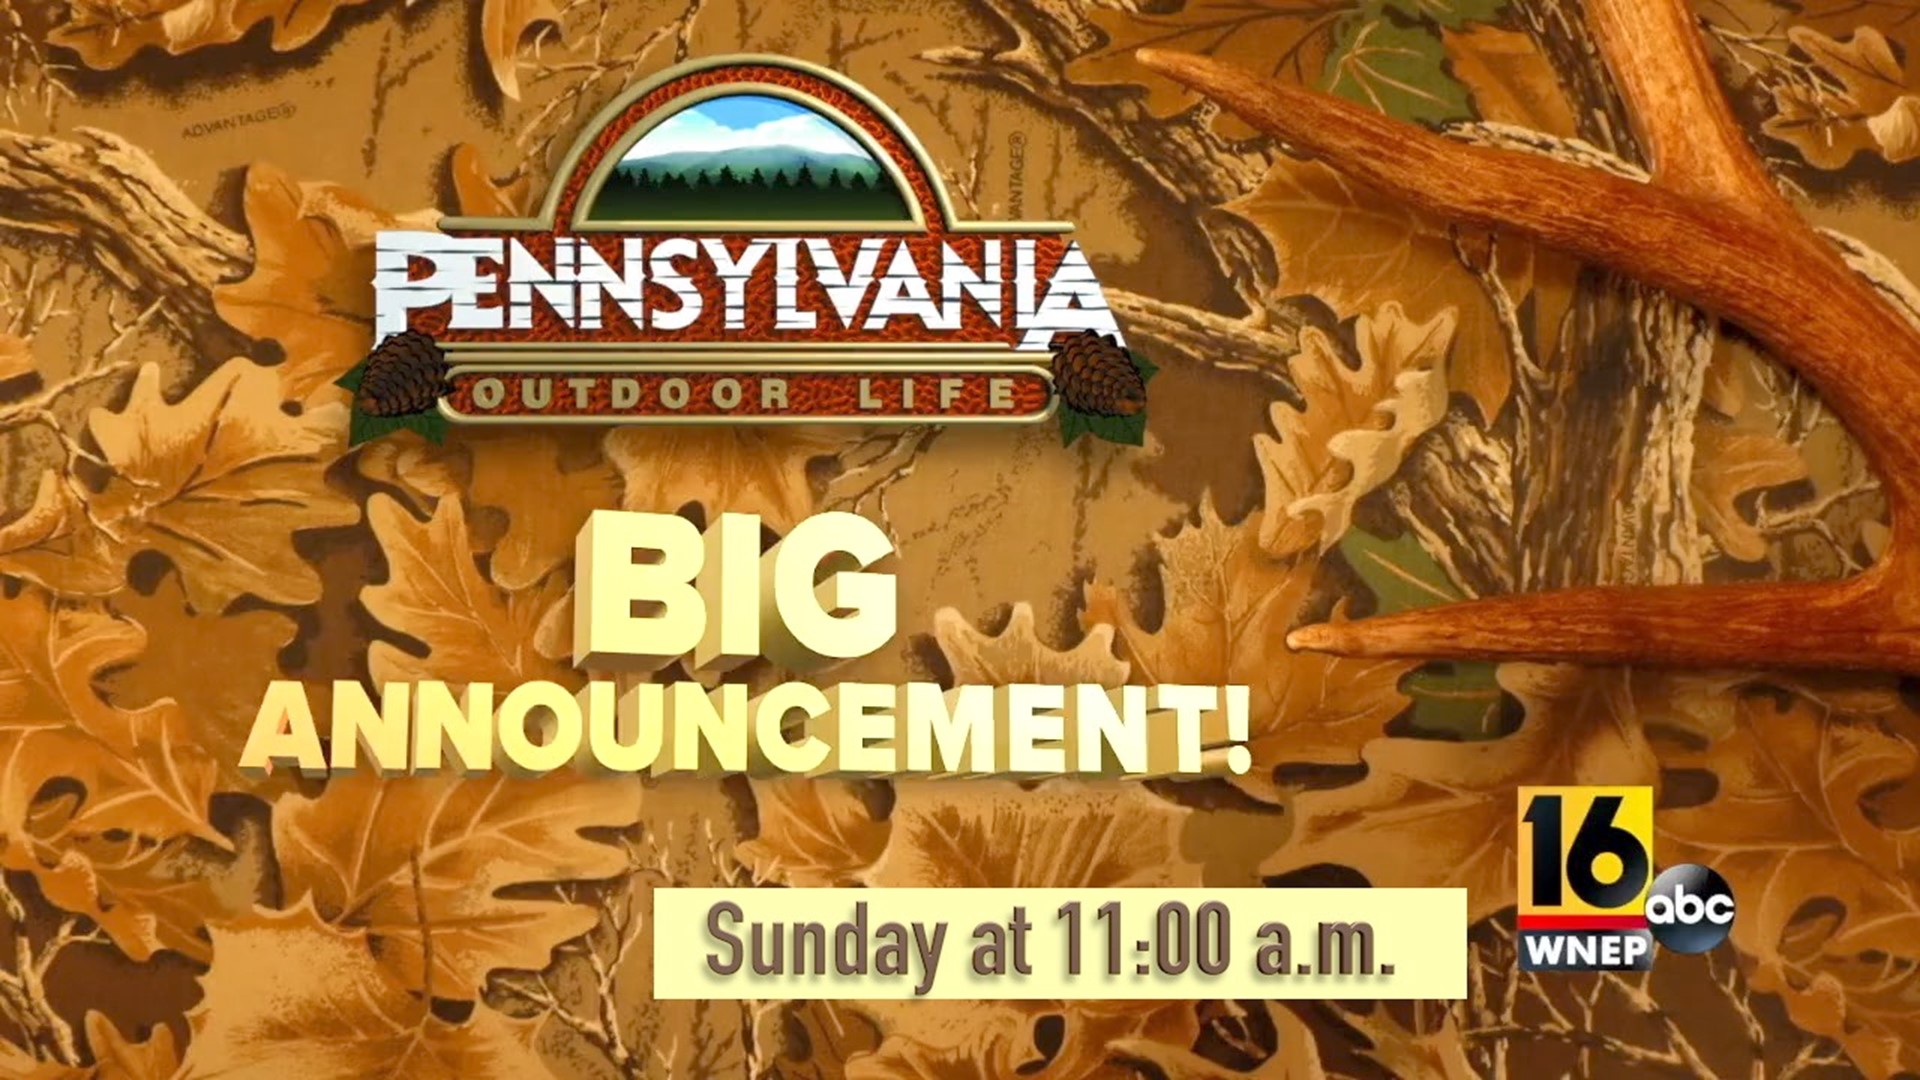 Now see Pennsylvania Outdoor Life earlier every Sunday morning at 11:00